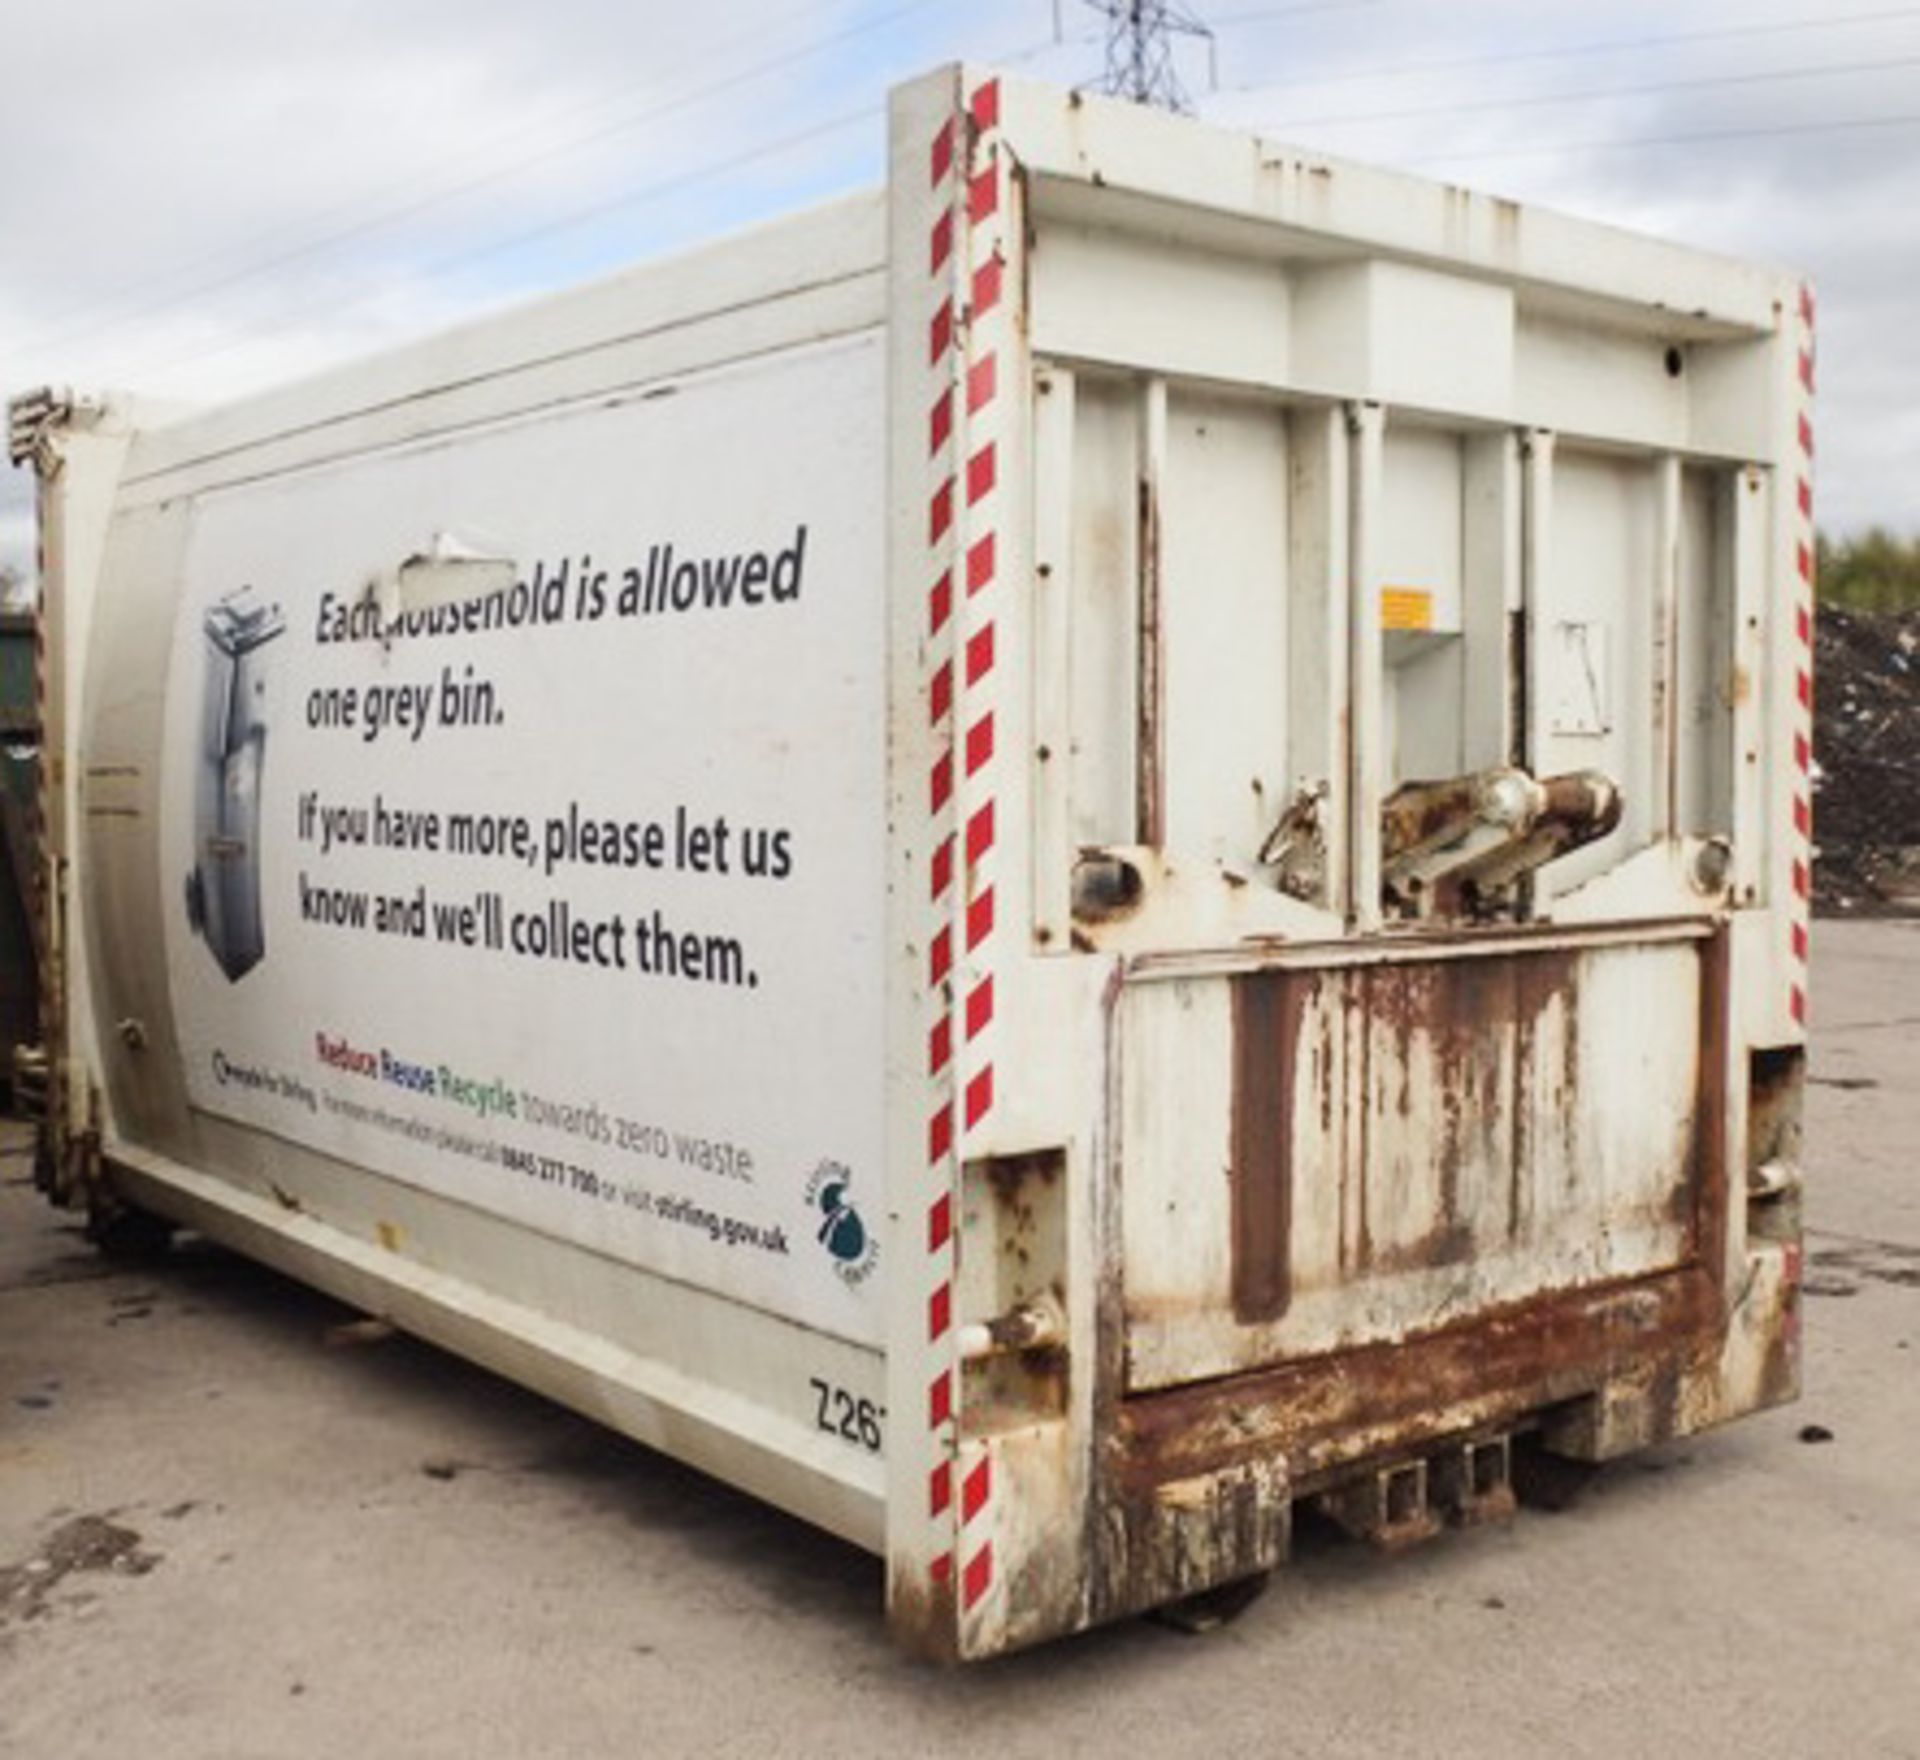 SELF LOADING DEMOUNTABLE WASTE CONTAINER C/W OPENING REAR DOOR, ASSET NO Z2673*** SOLD FROM SITE - L - Image 2 of 3